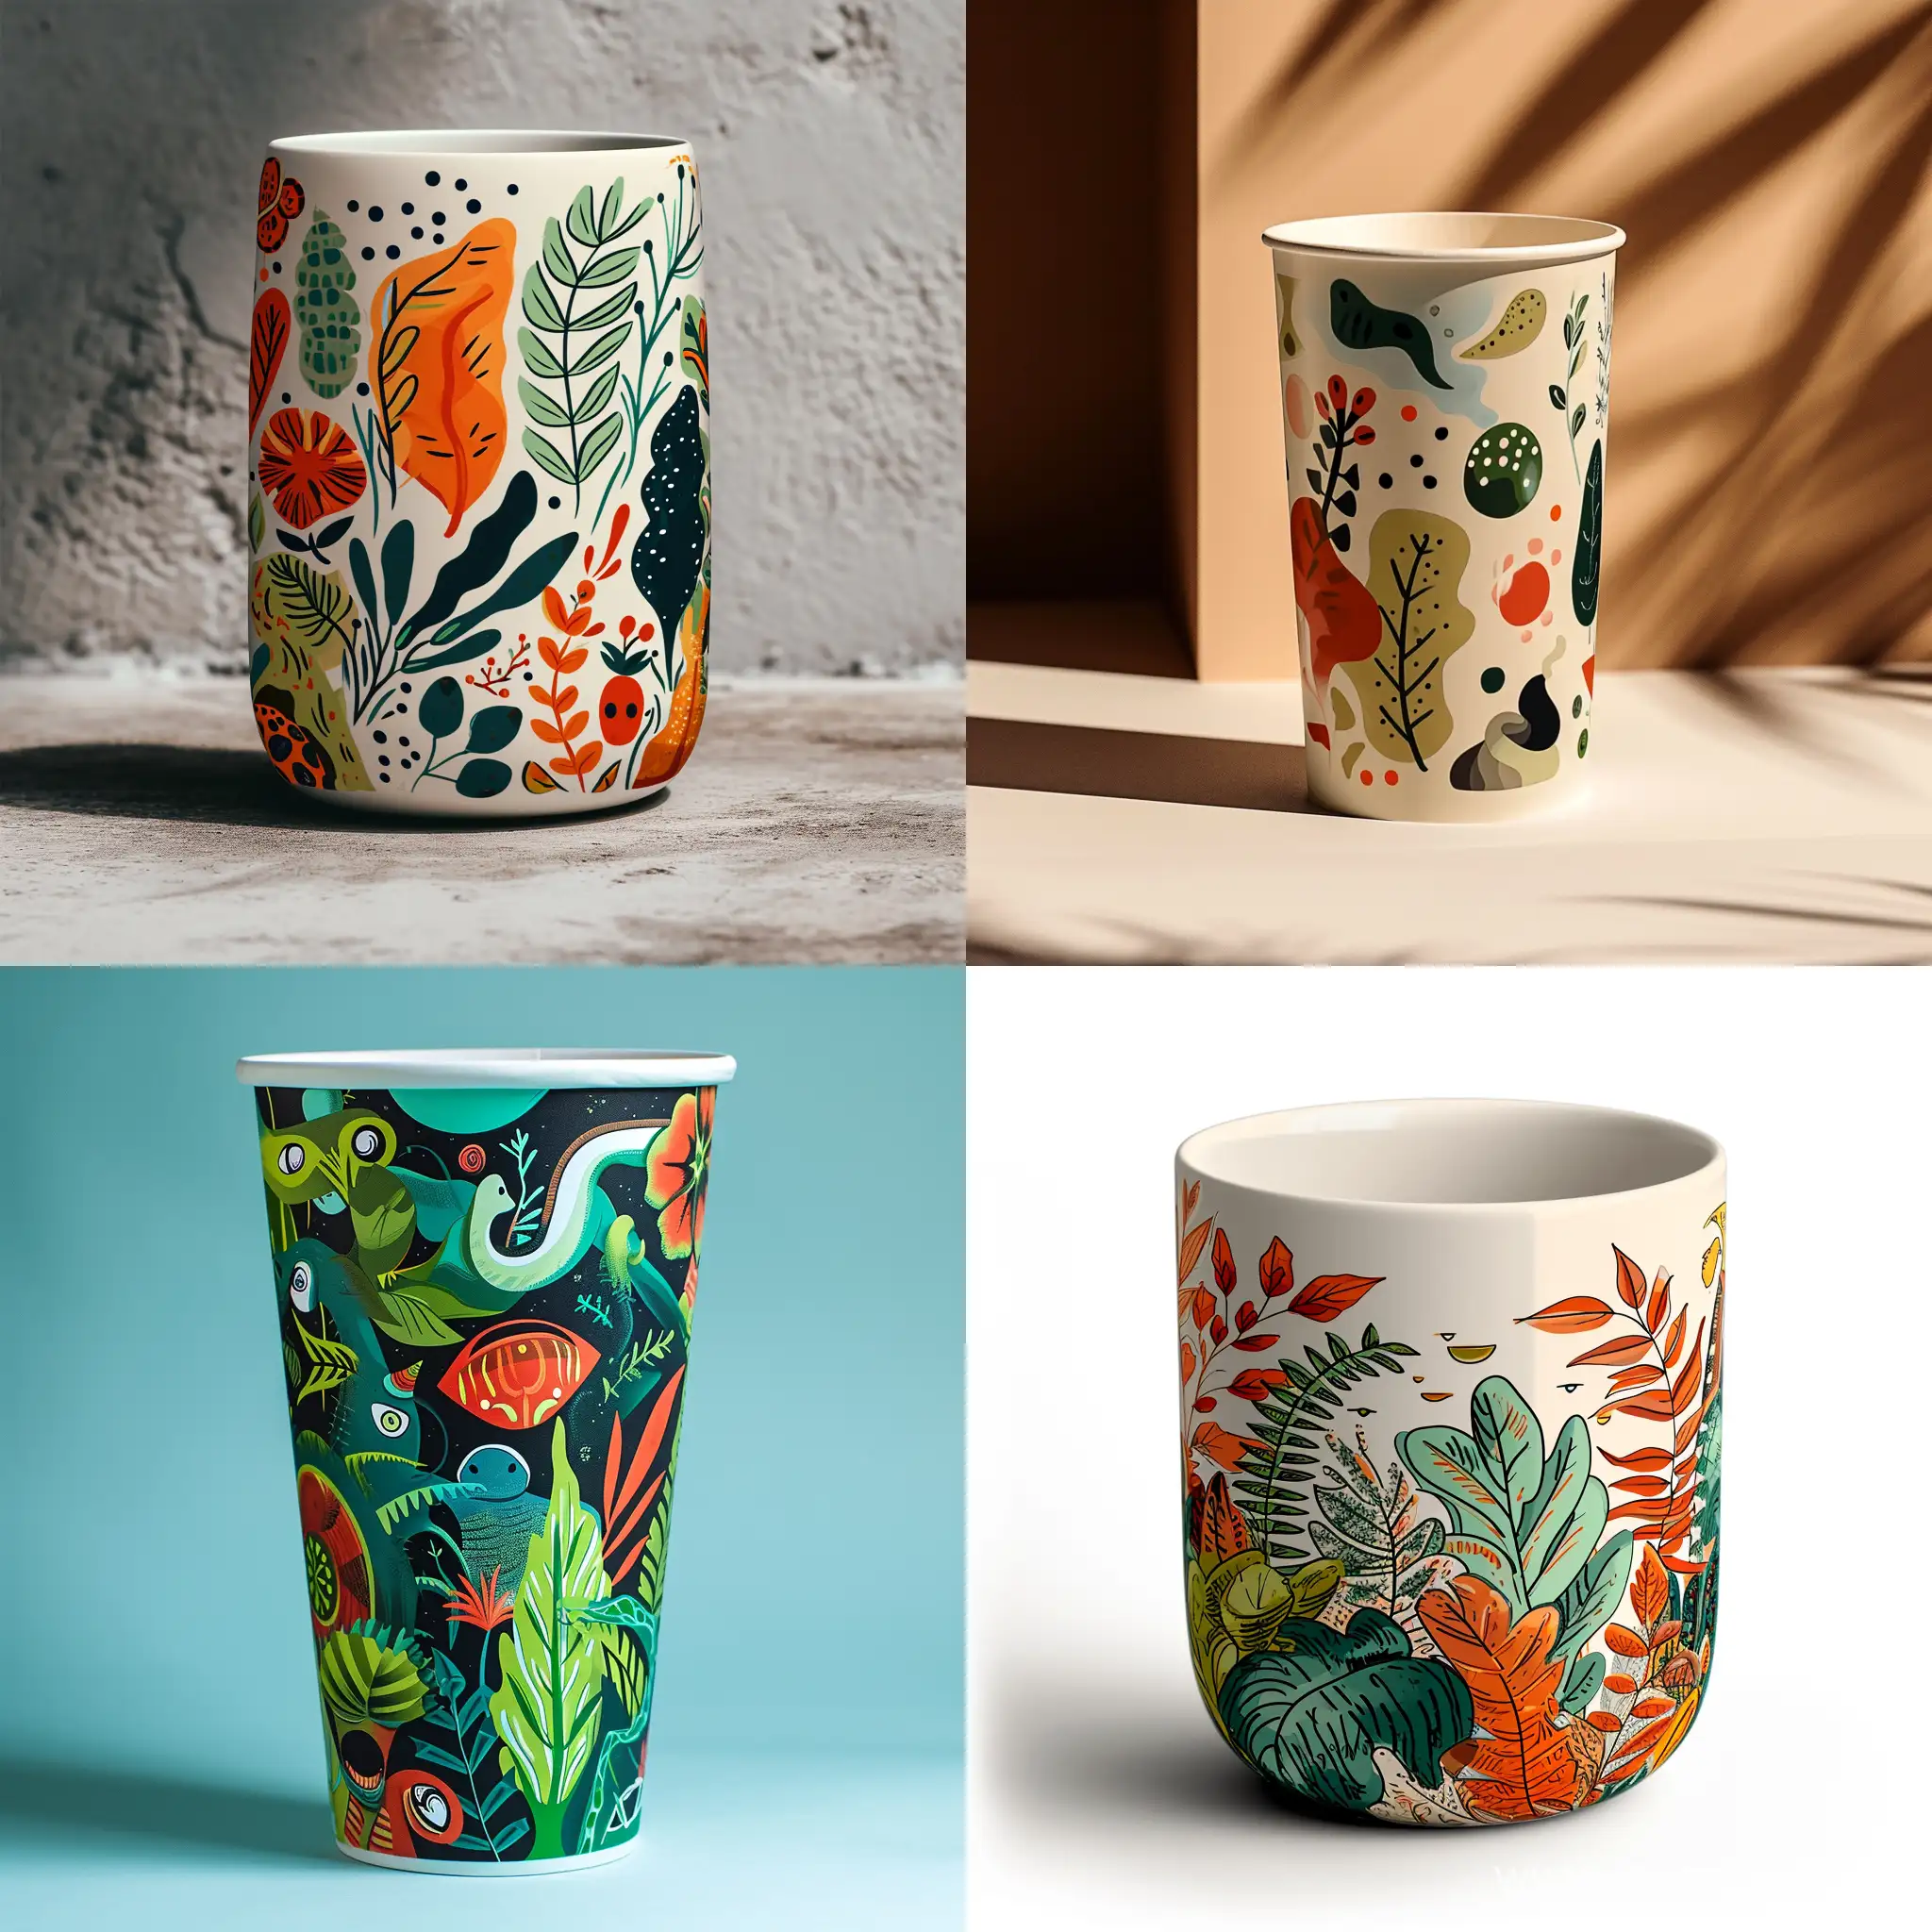 500 ml coffee cup with art on the theme of coffee, plants, aliens, illustration style